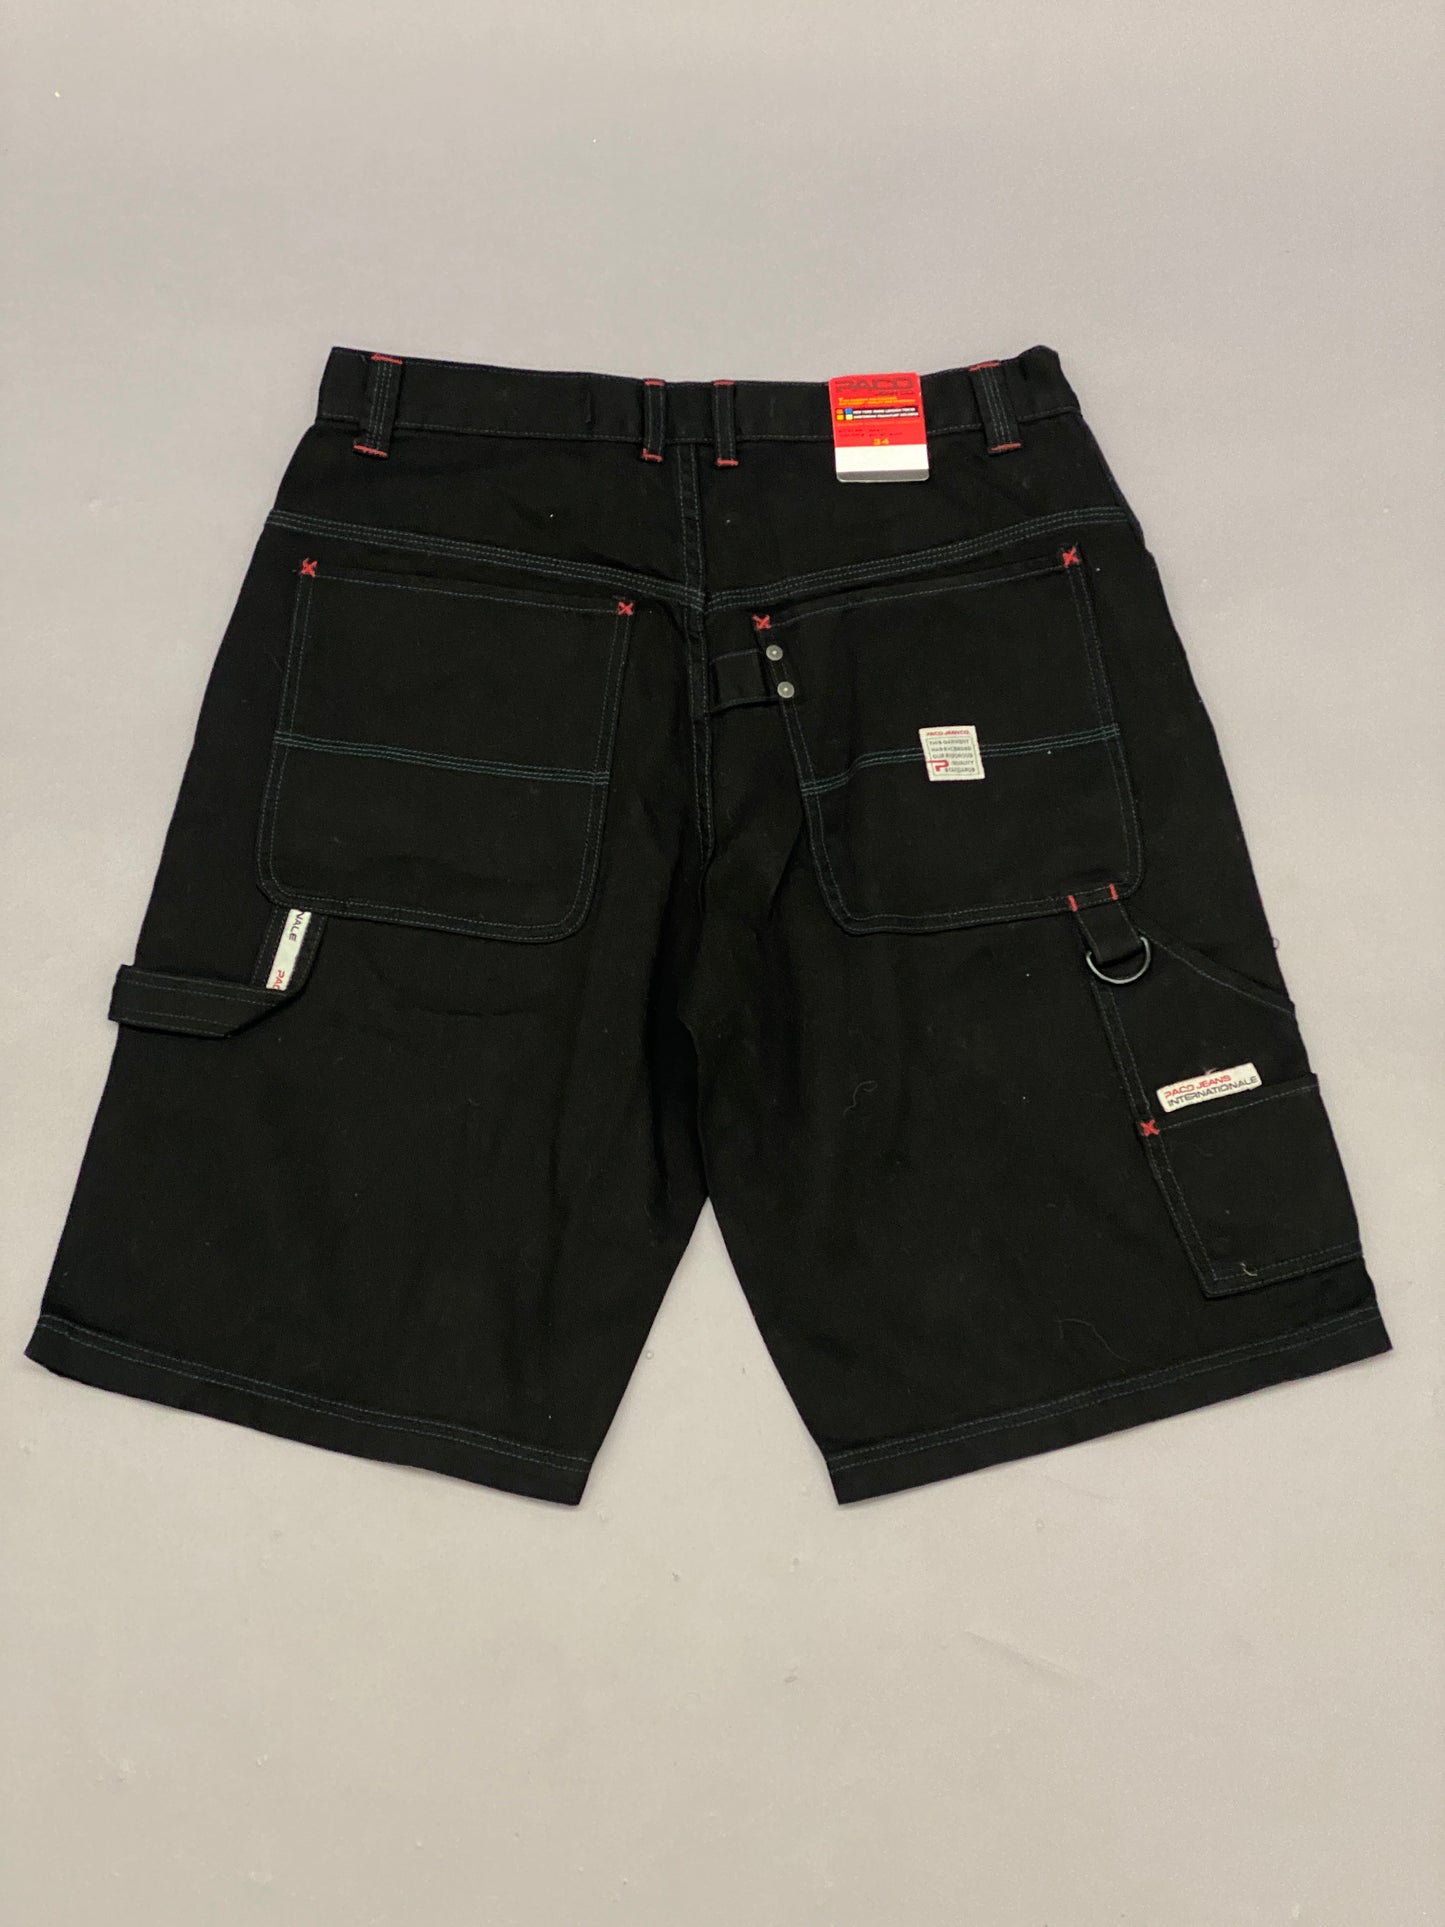 Paco Jeans Vintage Shorts - 34 (Deadstock)